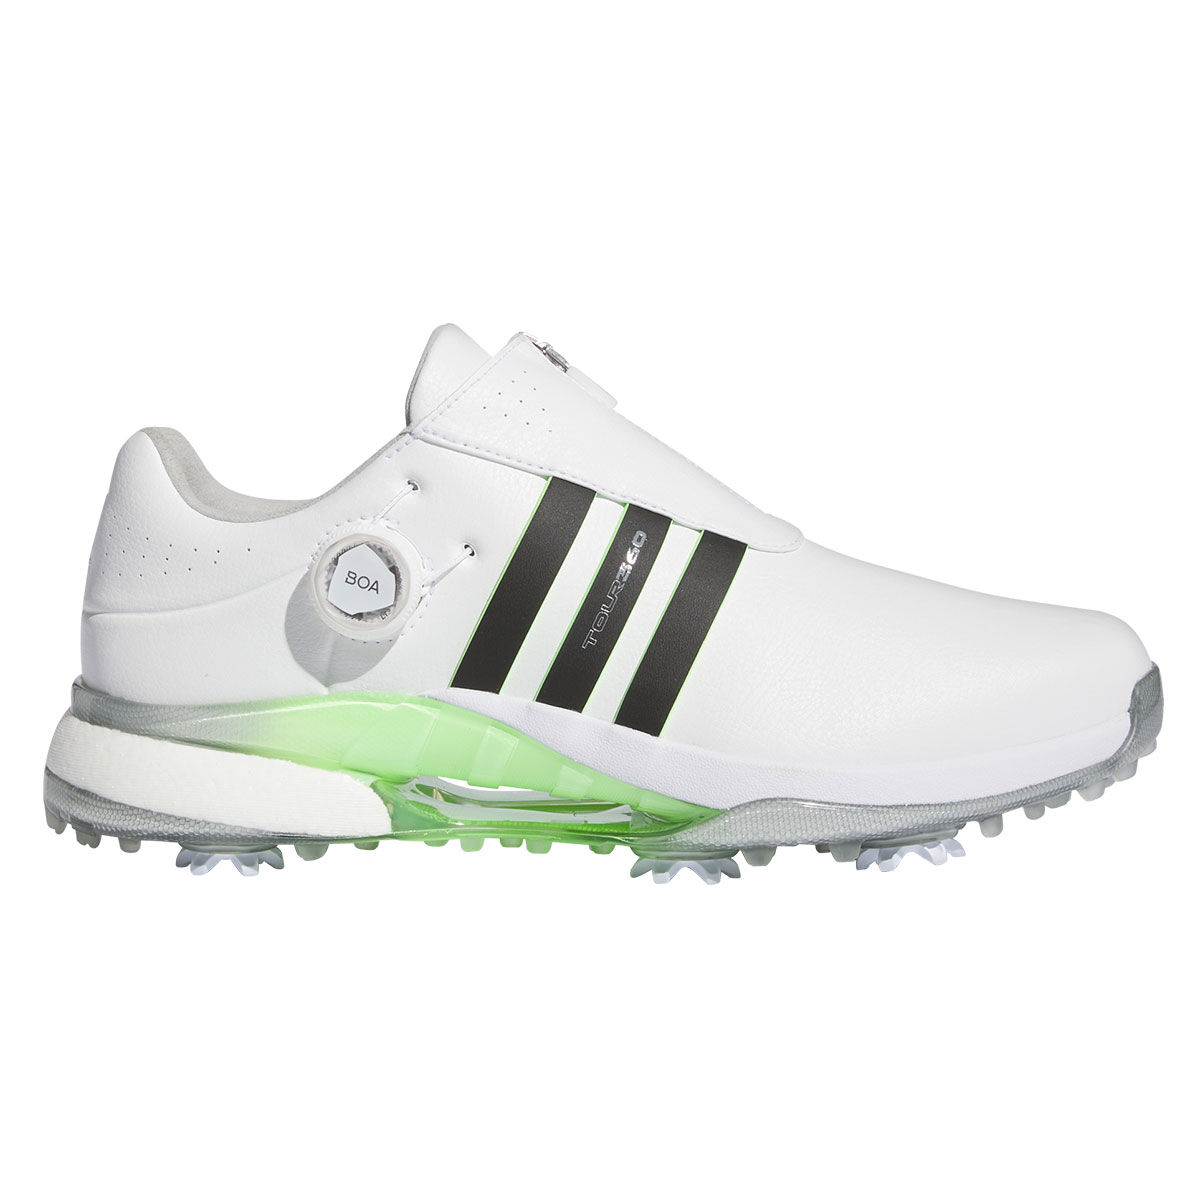 adidas Men’s Tour360 24 BOA Boost Waterproof Spiked Golf Shoes, Mens, White/core black/green spark, 11 | American Golf